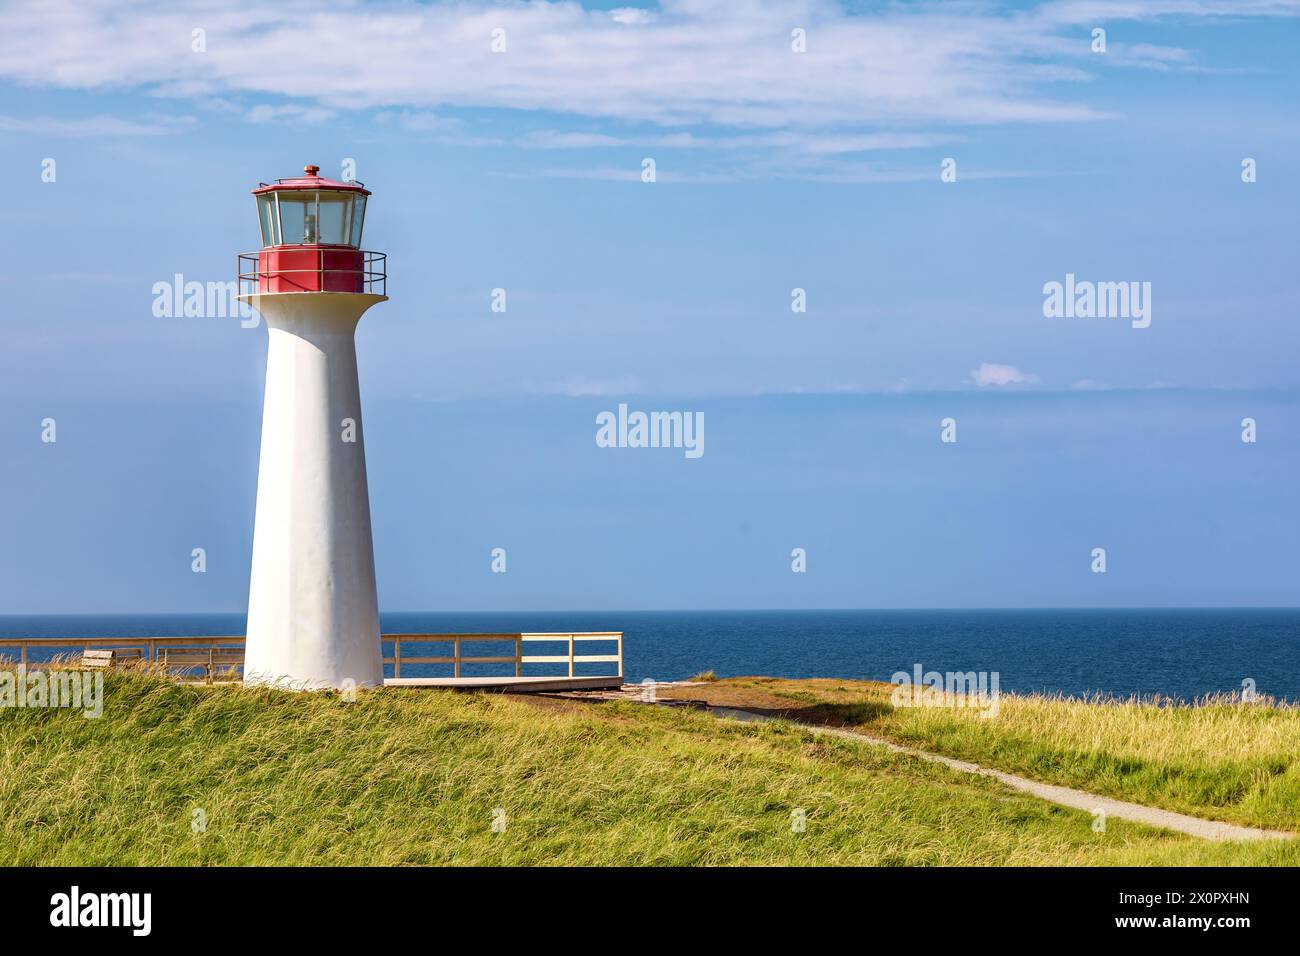 Borgot, or Cape Herisse lighthouse of Cap aux Meules, Magdalen Islands, Canada. The lighthouse stands on the rugged red cliffs of the Etang du Nord. Stock Photo